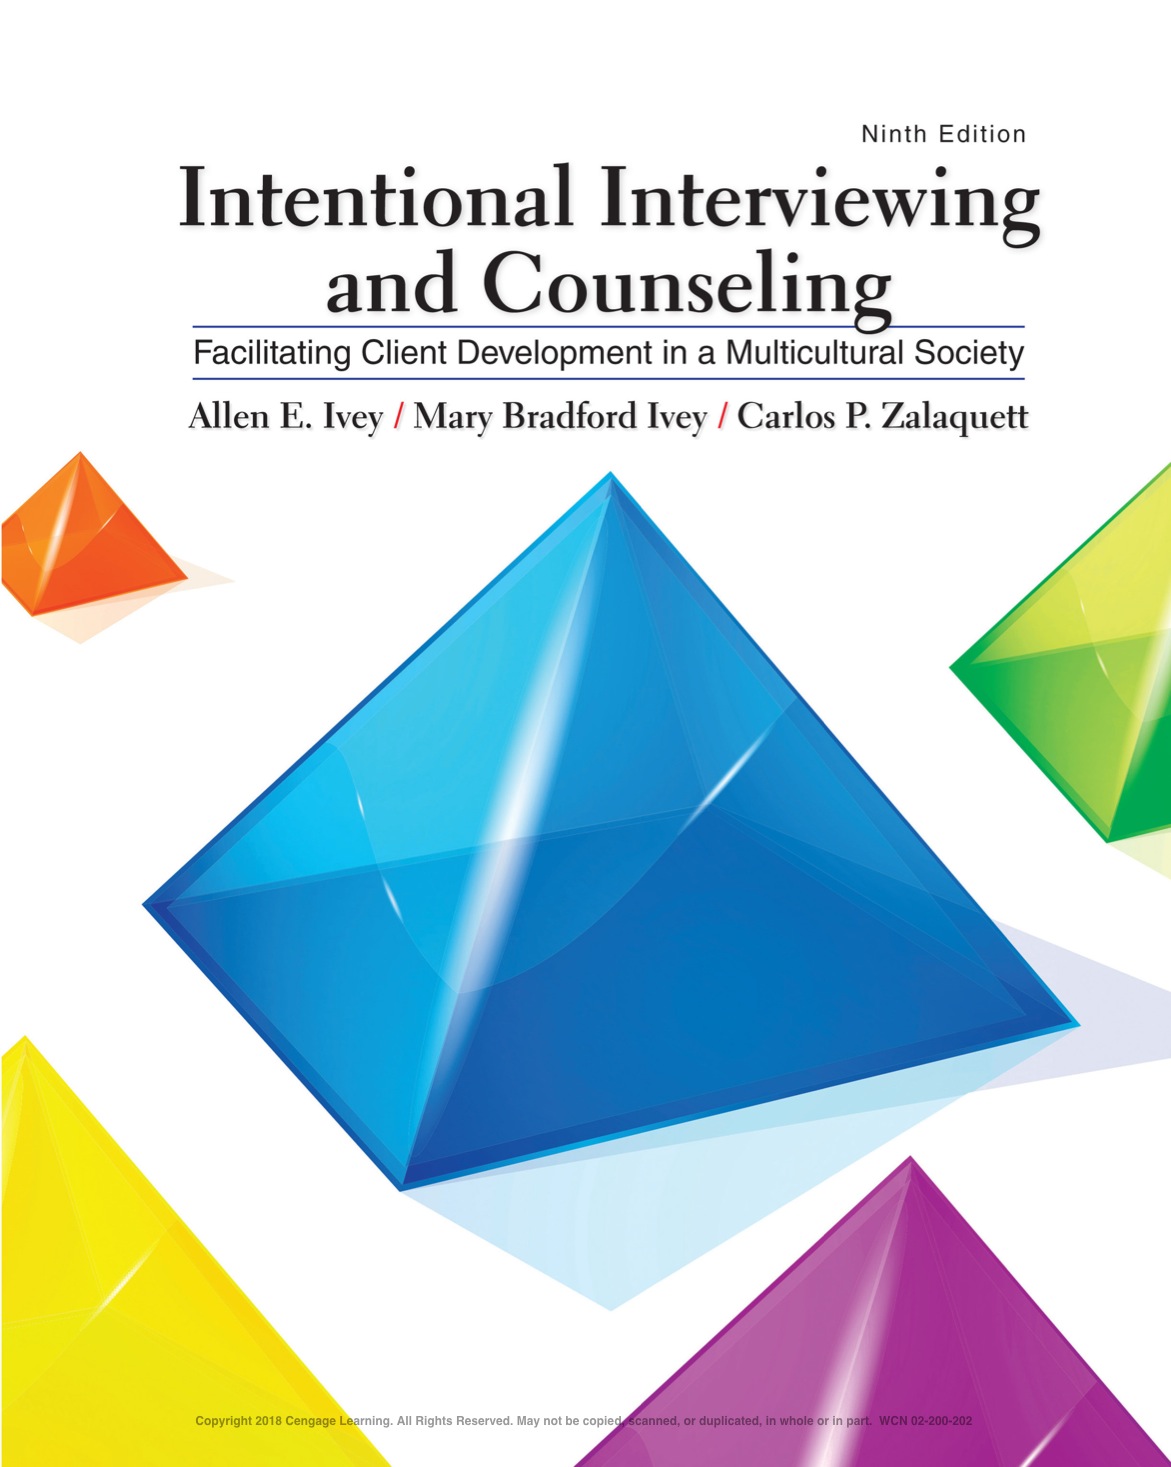 Intentional Interviewing and Counseling: Facilitating Client Development in a Multicultural Society (9th Edition) - eBook